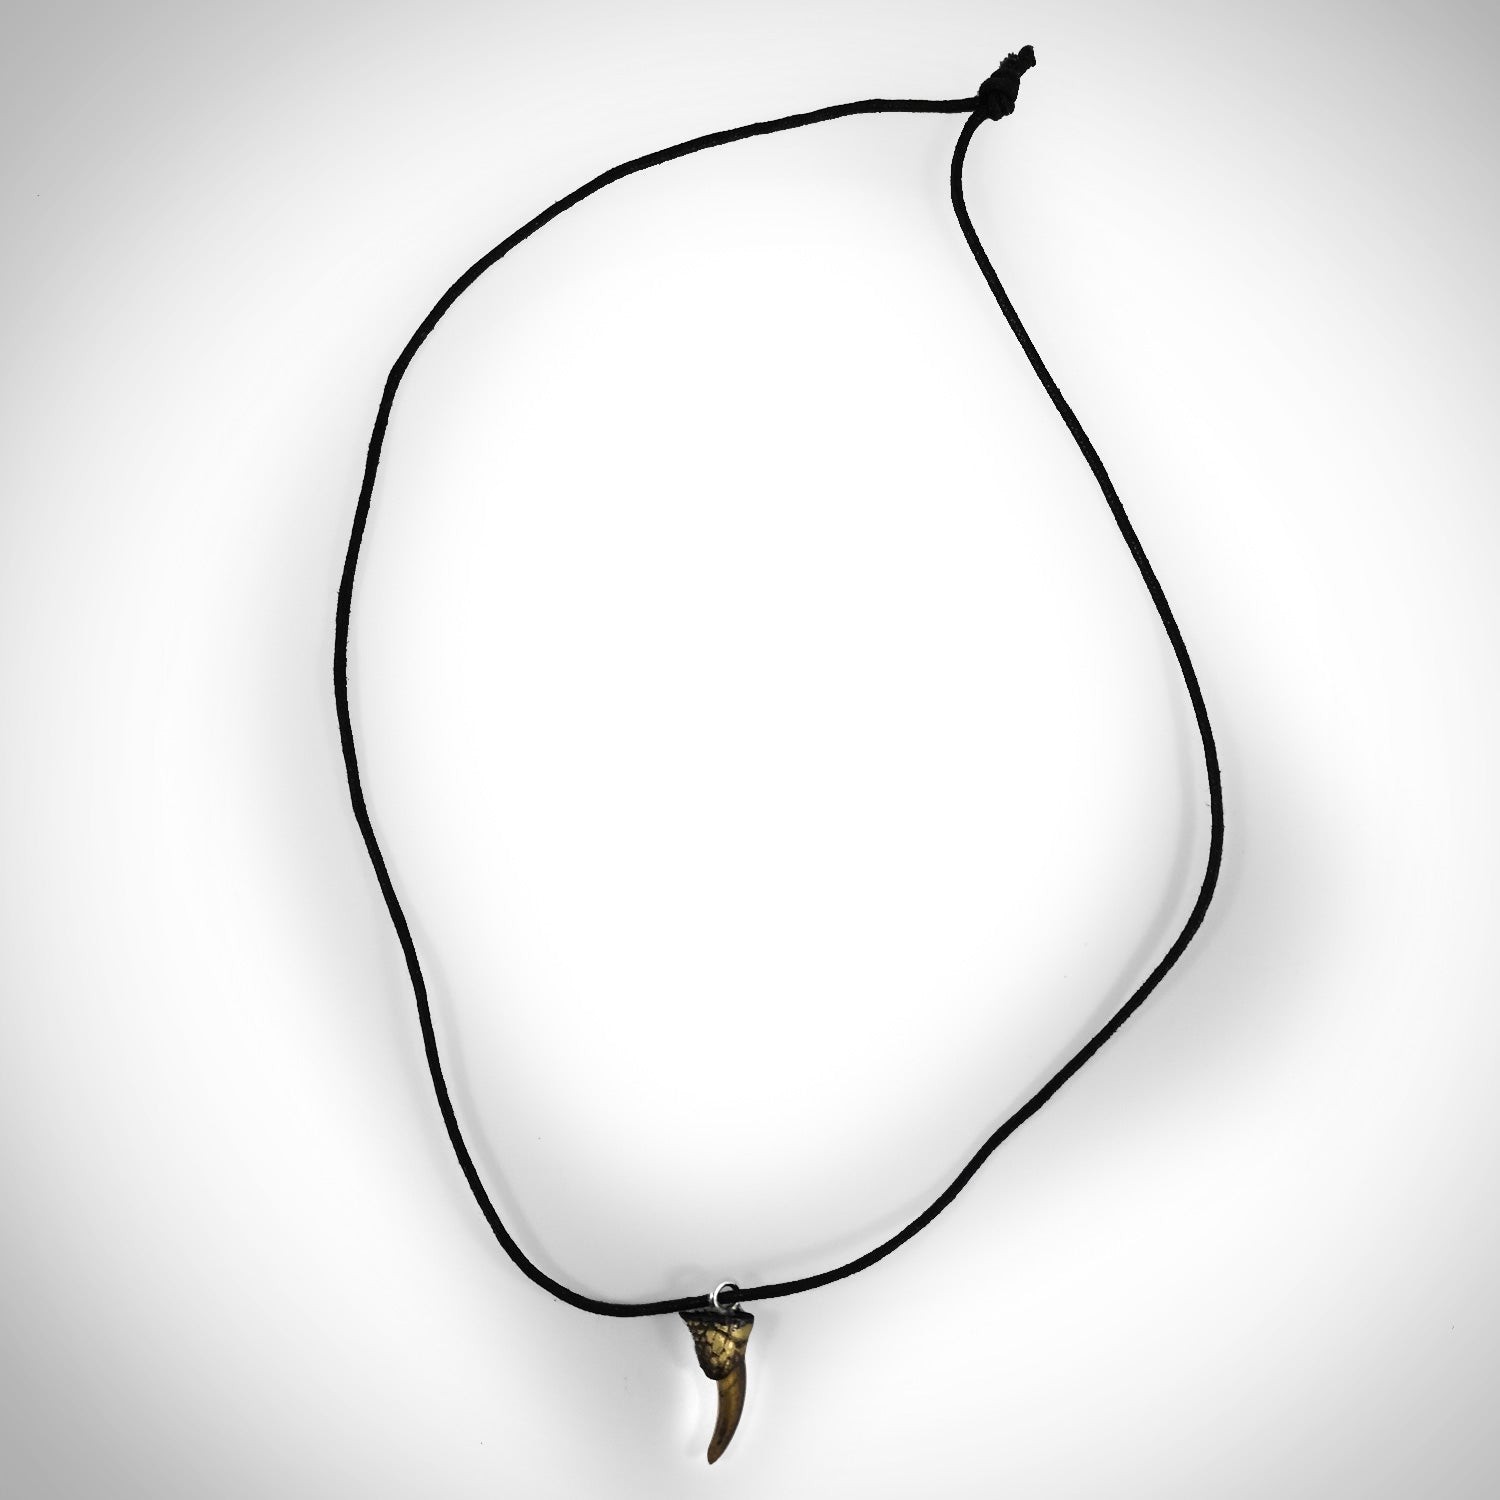 Claw necklace for men, men's alligator tooth necklace with a black wax  cord, silver plated claw pendant. gift for him, men's jewelry – Shani & Adi  Jewelry